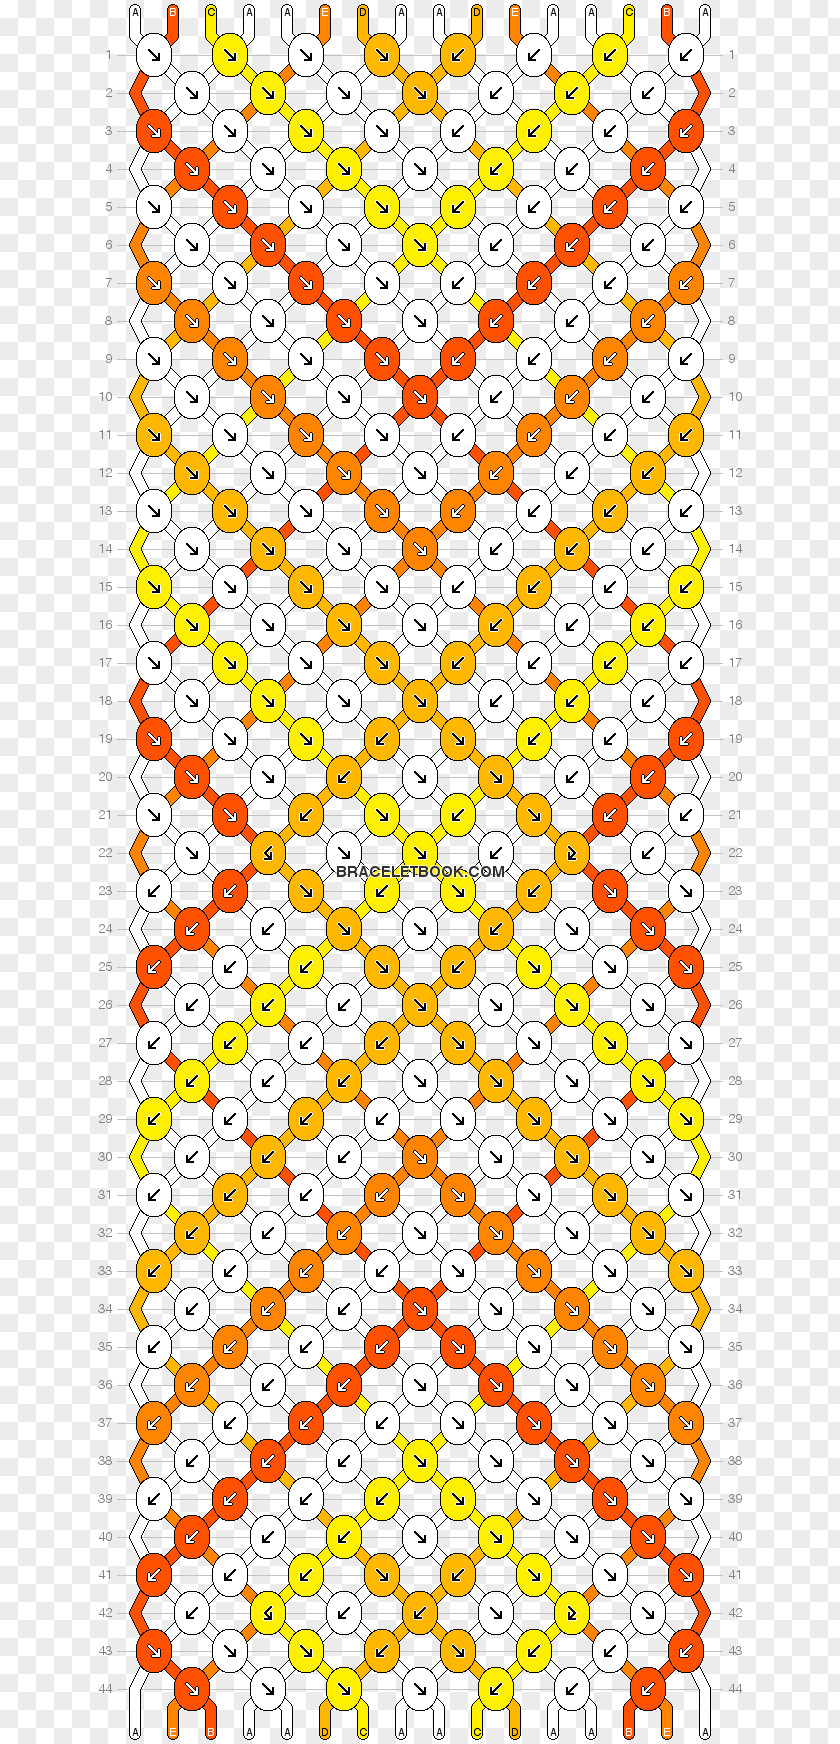 Friendship Bracelet Pattern Embroidery Thread PNG